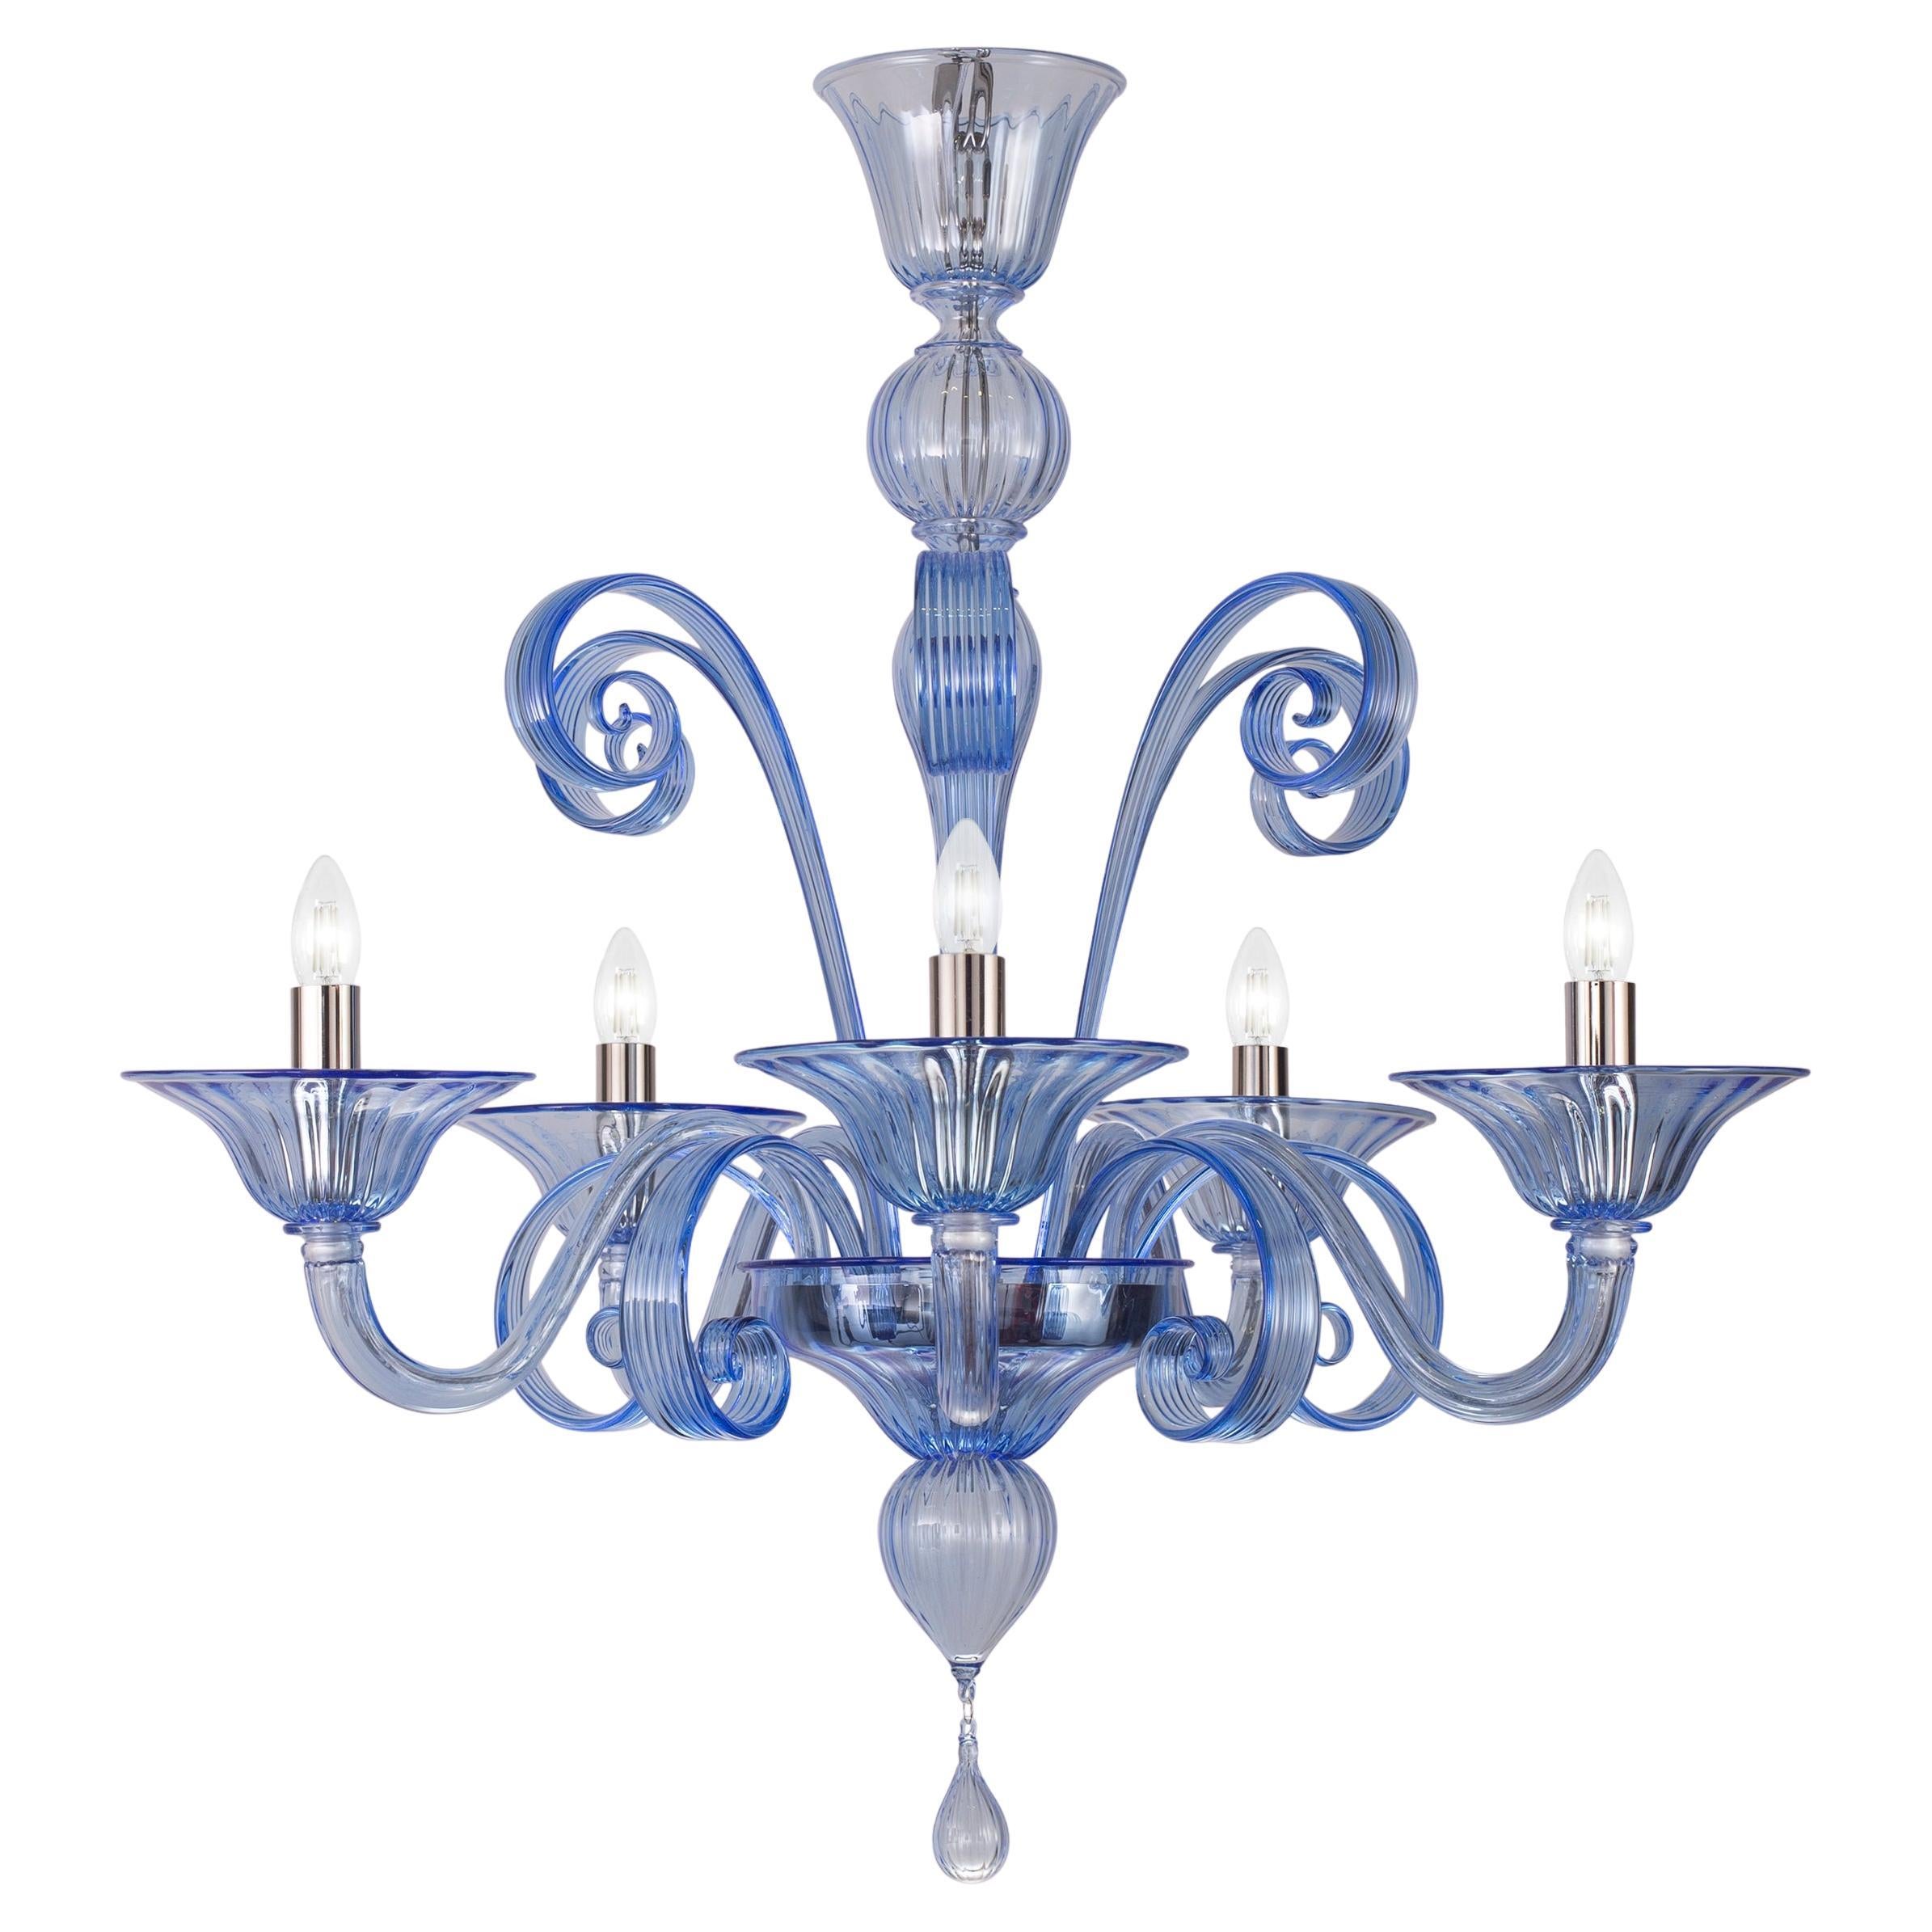 Capriccio Chandelier 5 Arms Blue Artistic Murano Glass by Multiforme For Sale